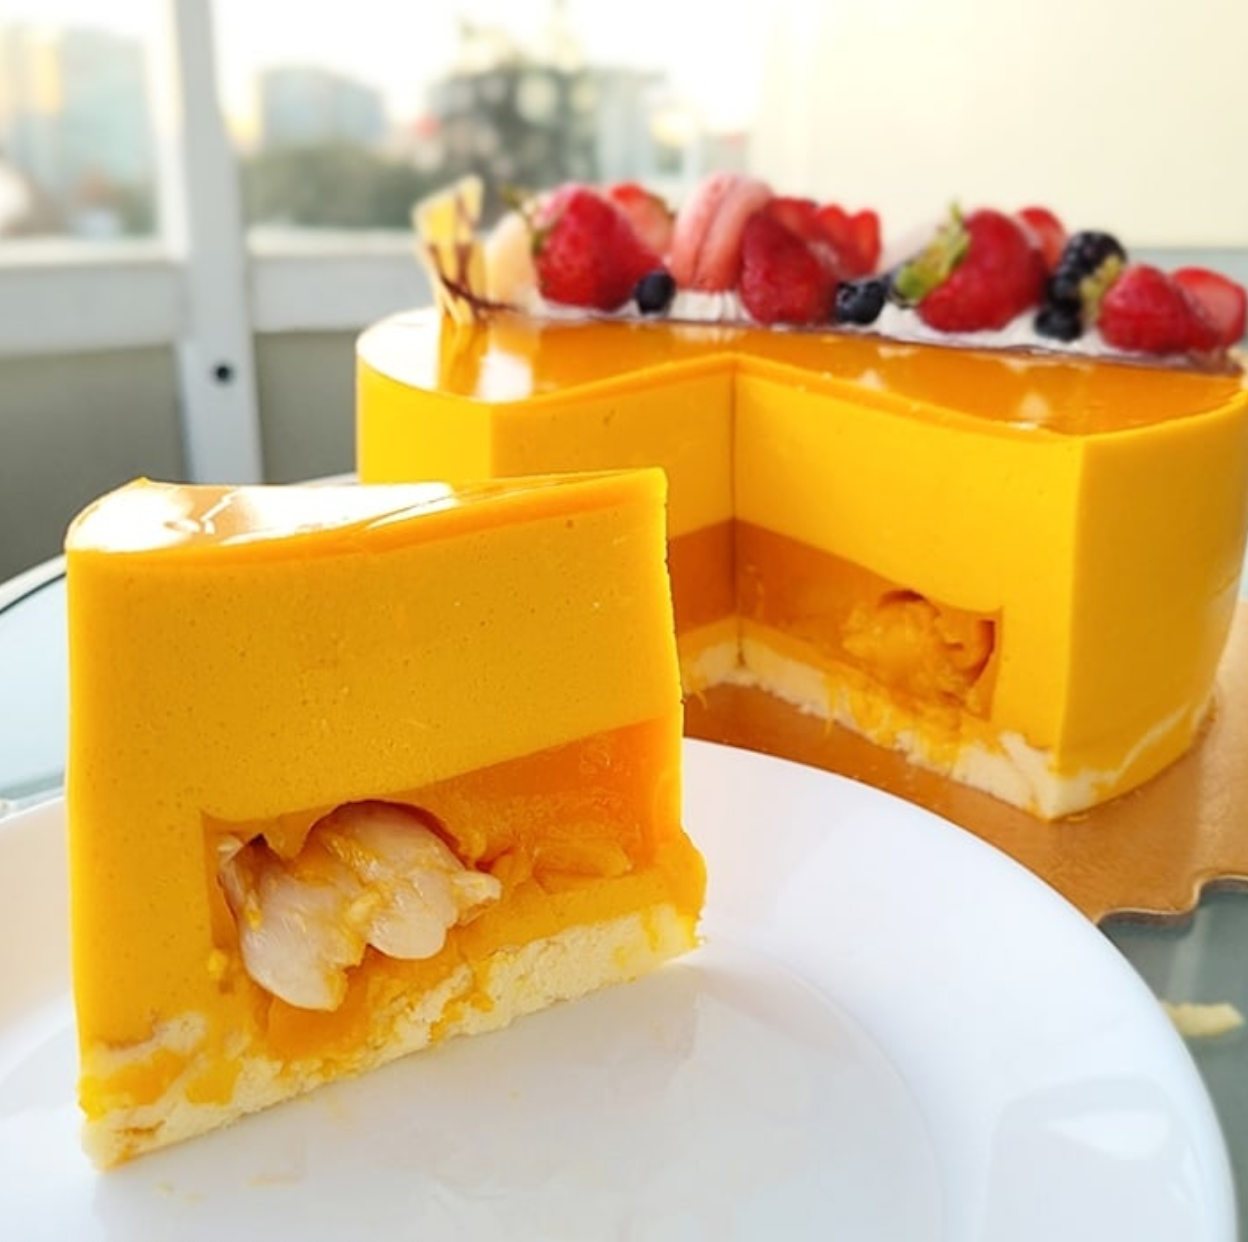 Eggless durian cake by Metta Café, youth with special needs – Metta Shop